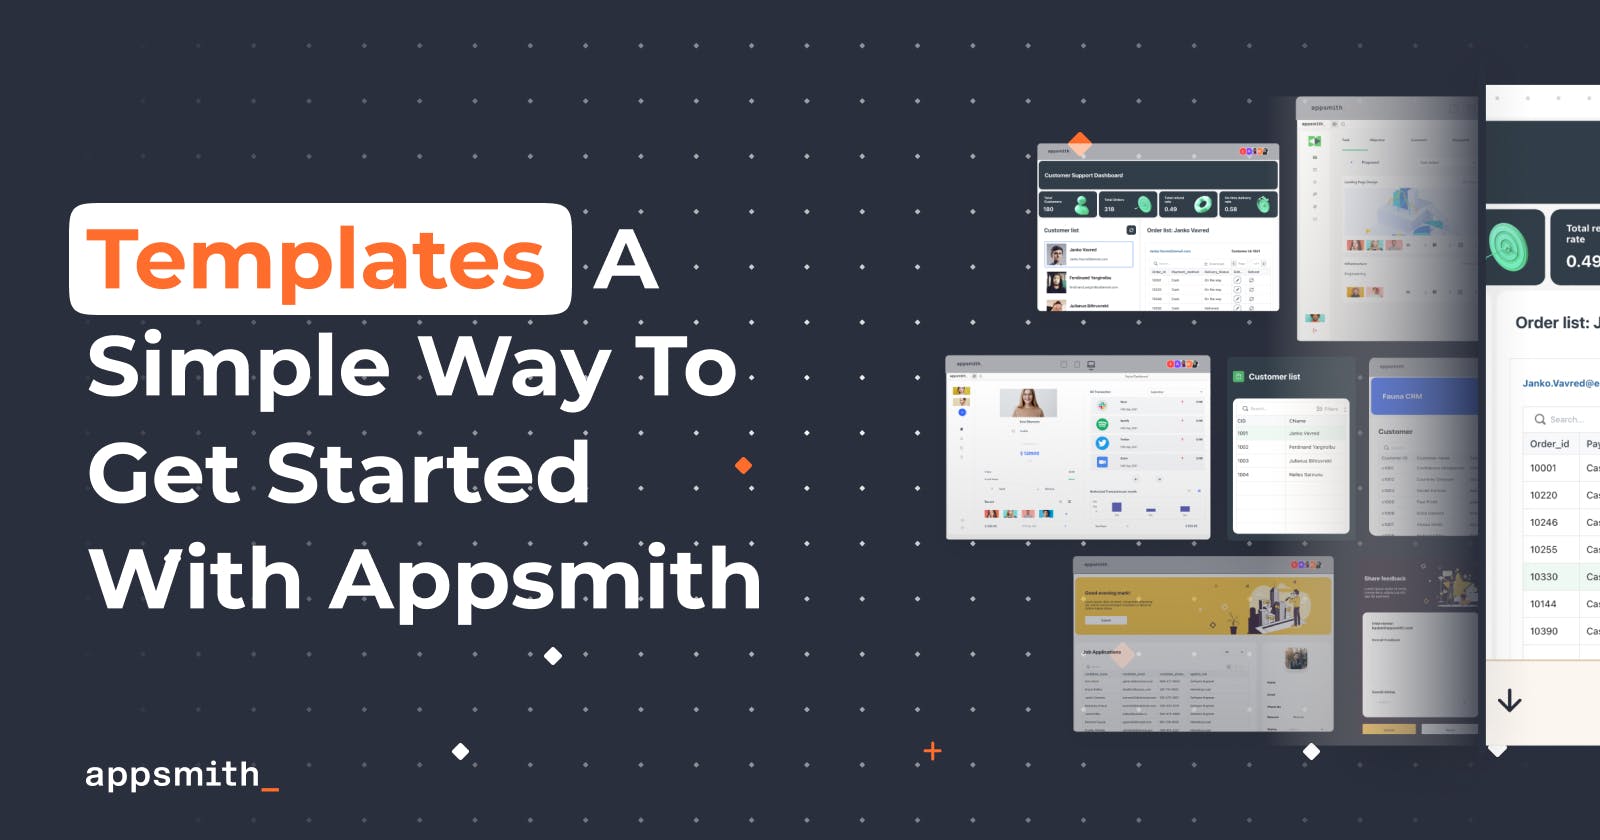 Templates: A Simple Way To Get Started With Appsmith